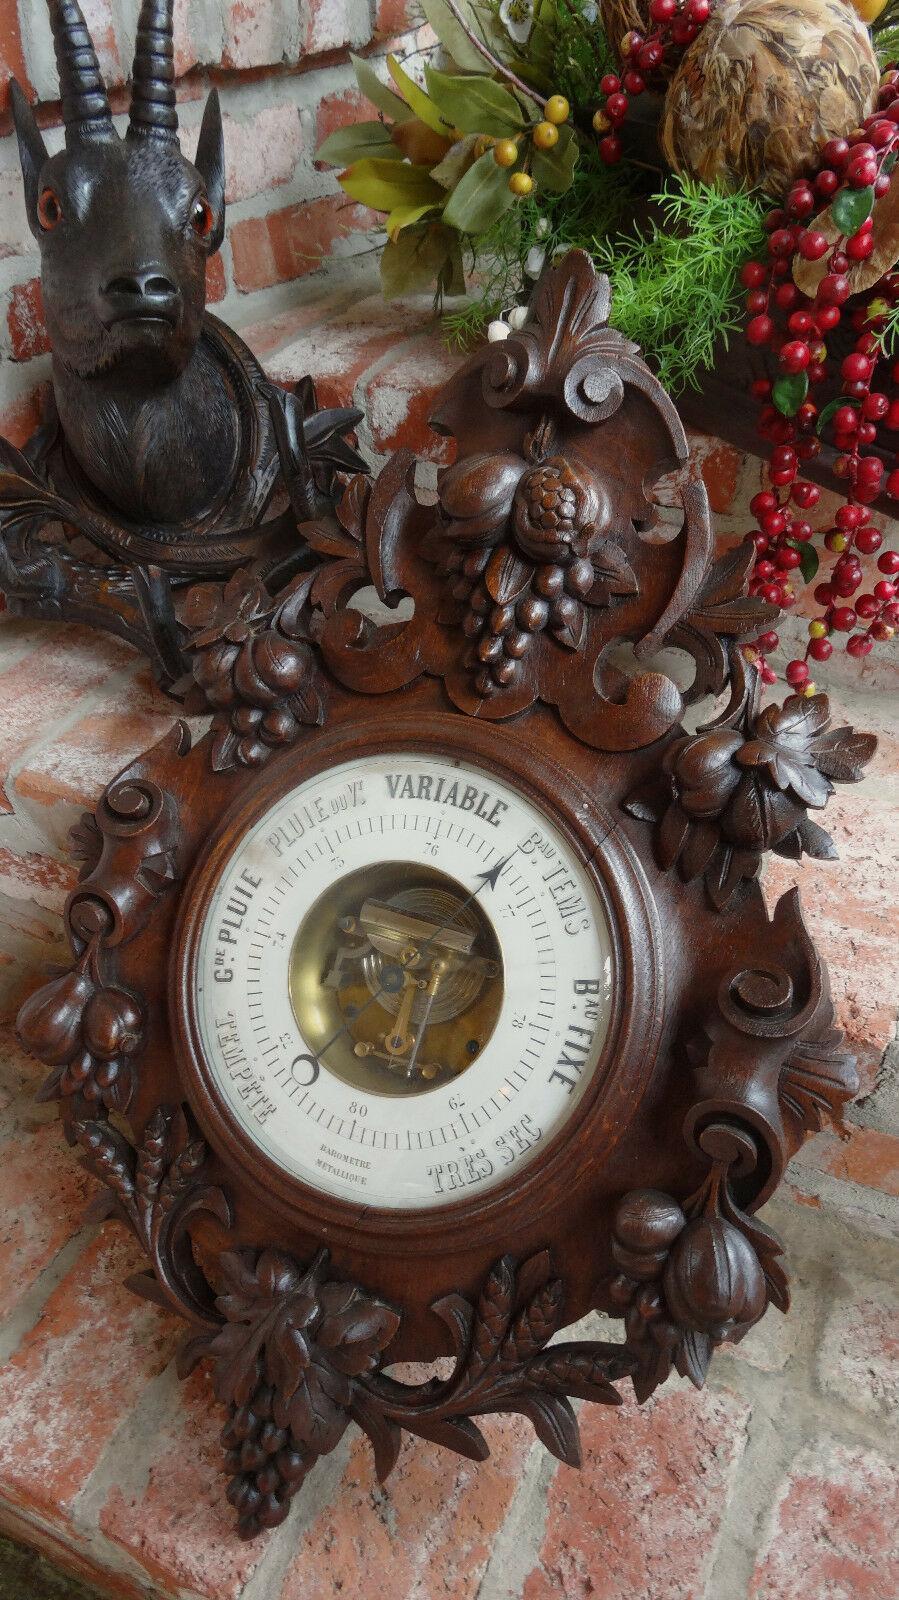 ~Direct from France~
~Beautiful carved black forest barometer/thermometer!
~Elaborate dimensional relief carvings, excellent Black Forest style~
 ~HUGE fruit and foliage, SOLID OAK, quality quality quality ~
~Look how the back box opens to